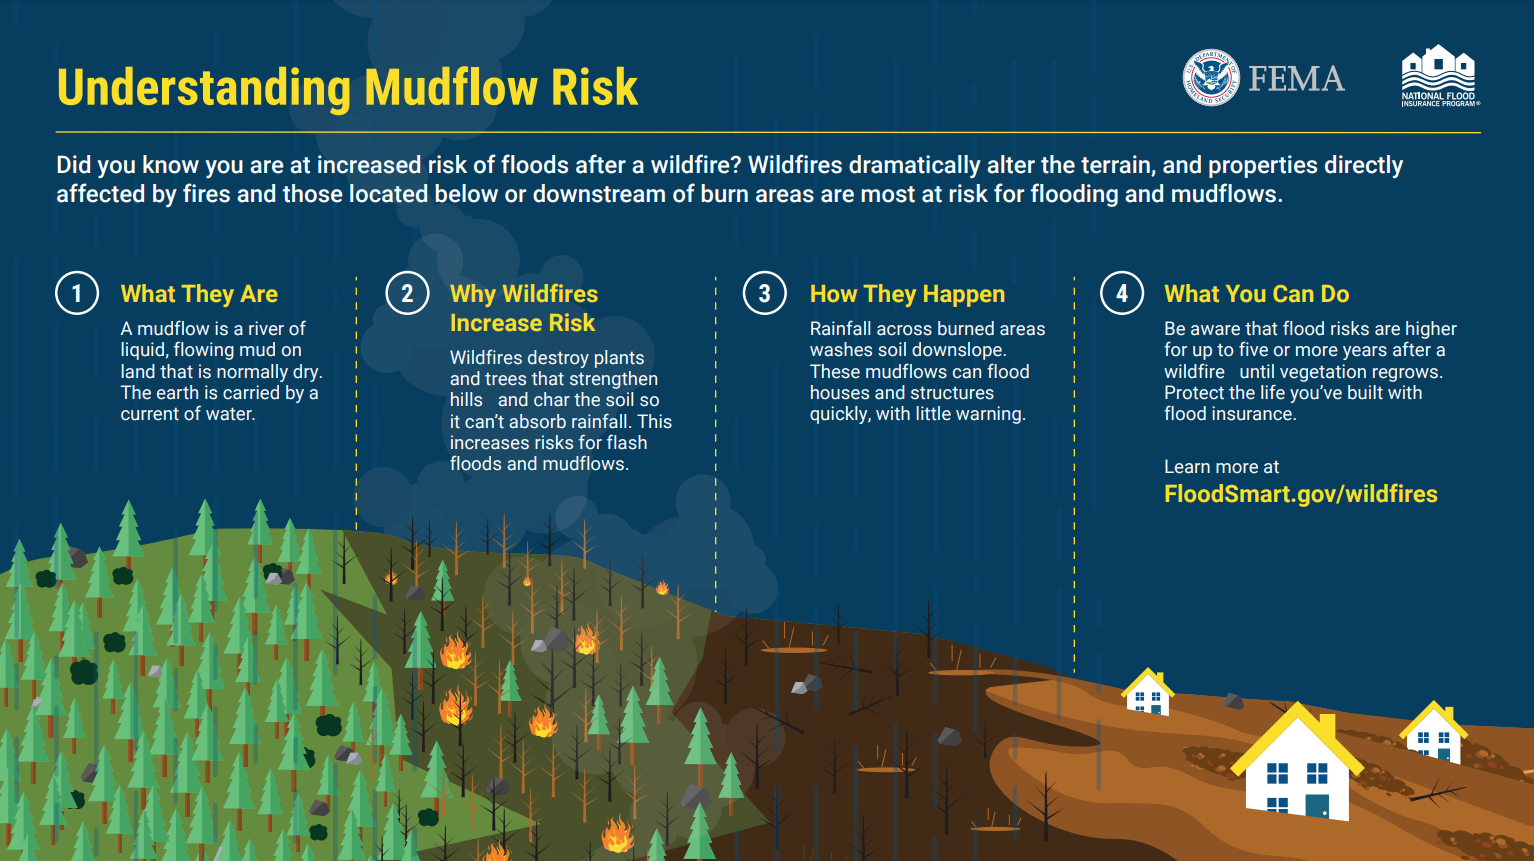 This is an infographic describing how mudflows happen after fires